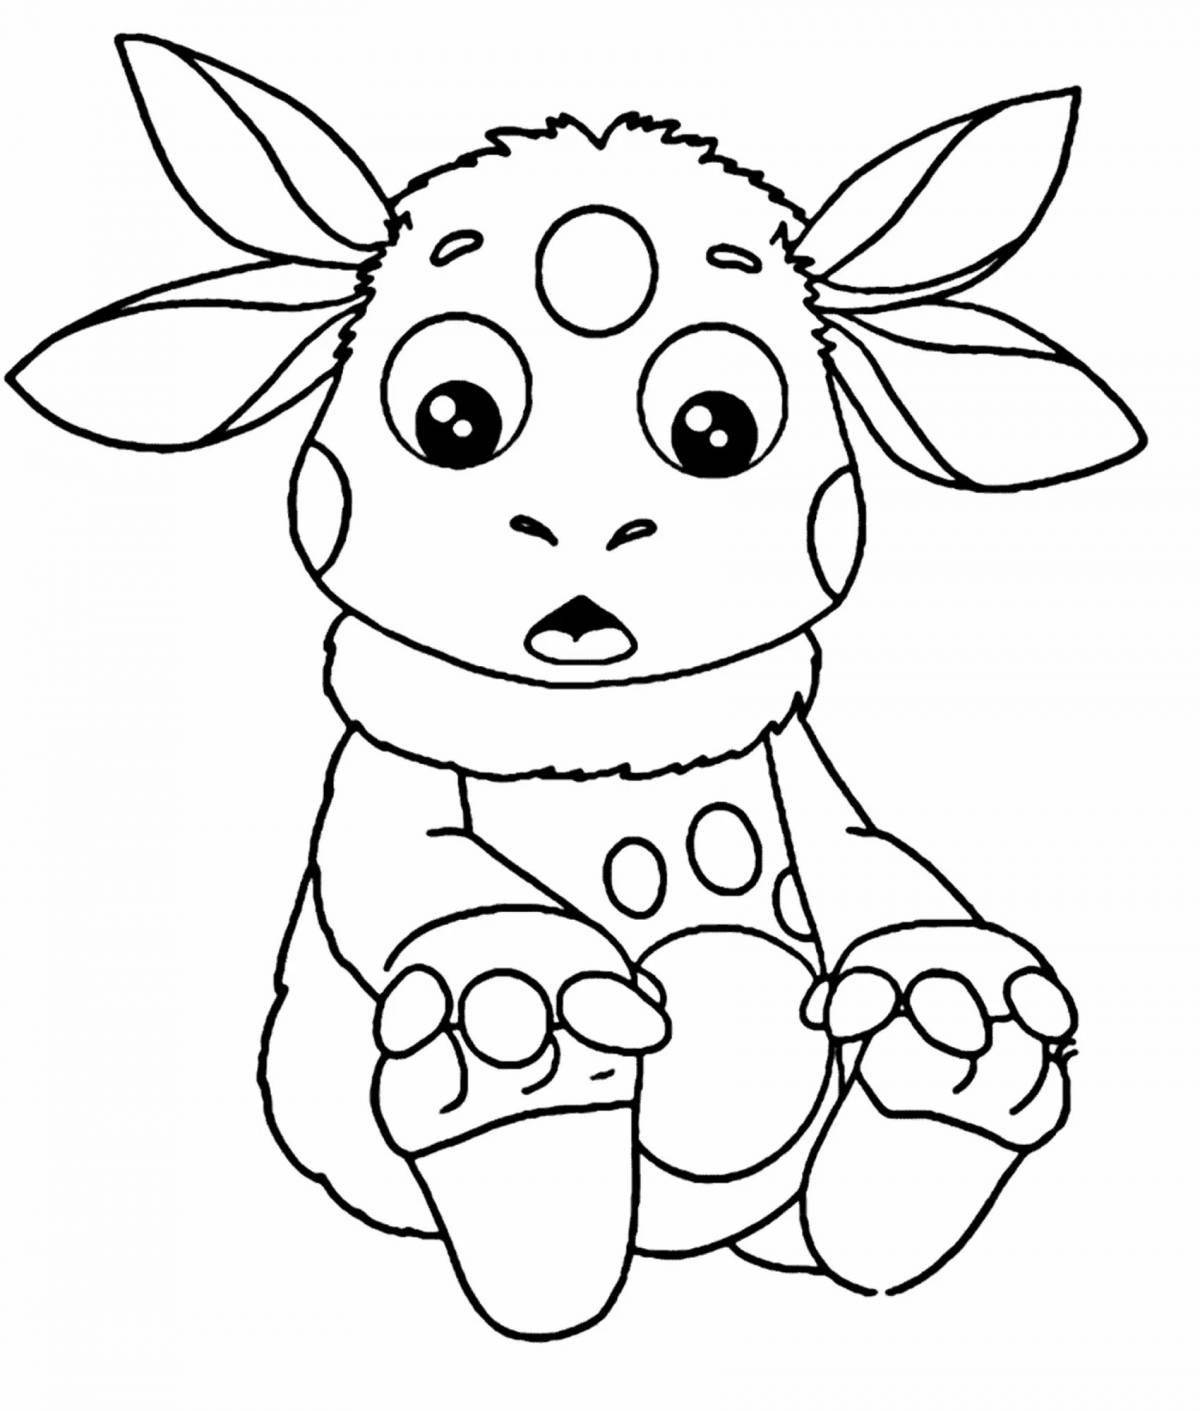 Crazy Luntik coloring pages for kids 6-7 years old